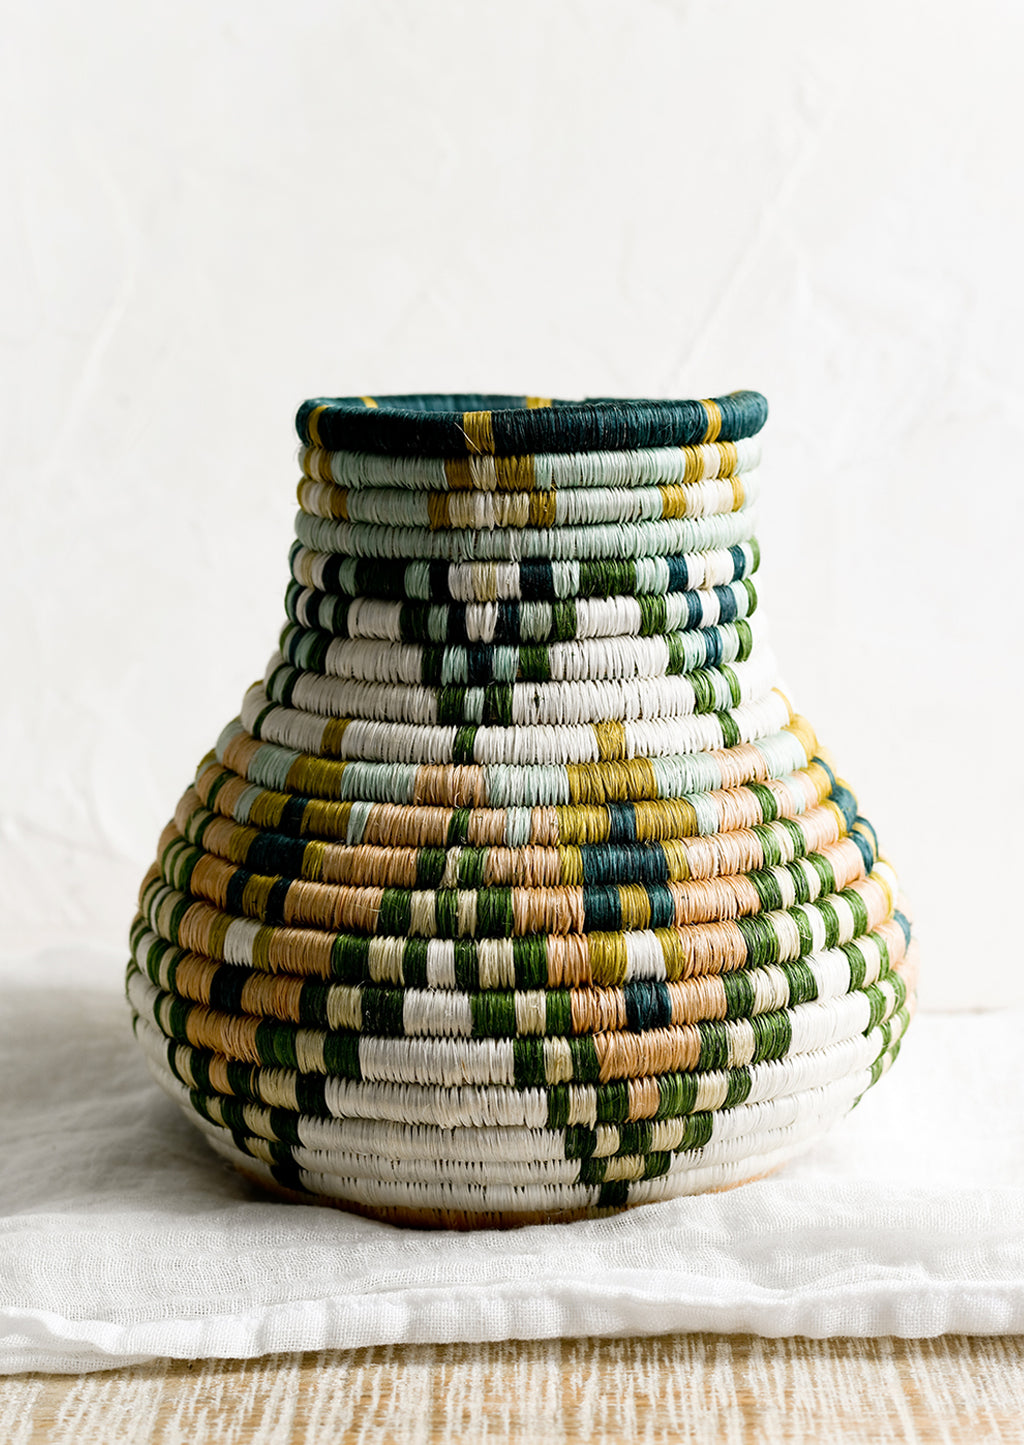 2: A sweetgrass woven vase with bulbous shape.